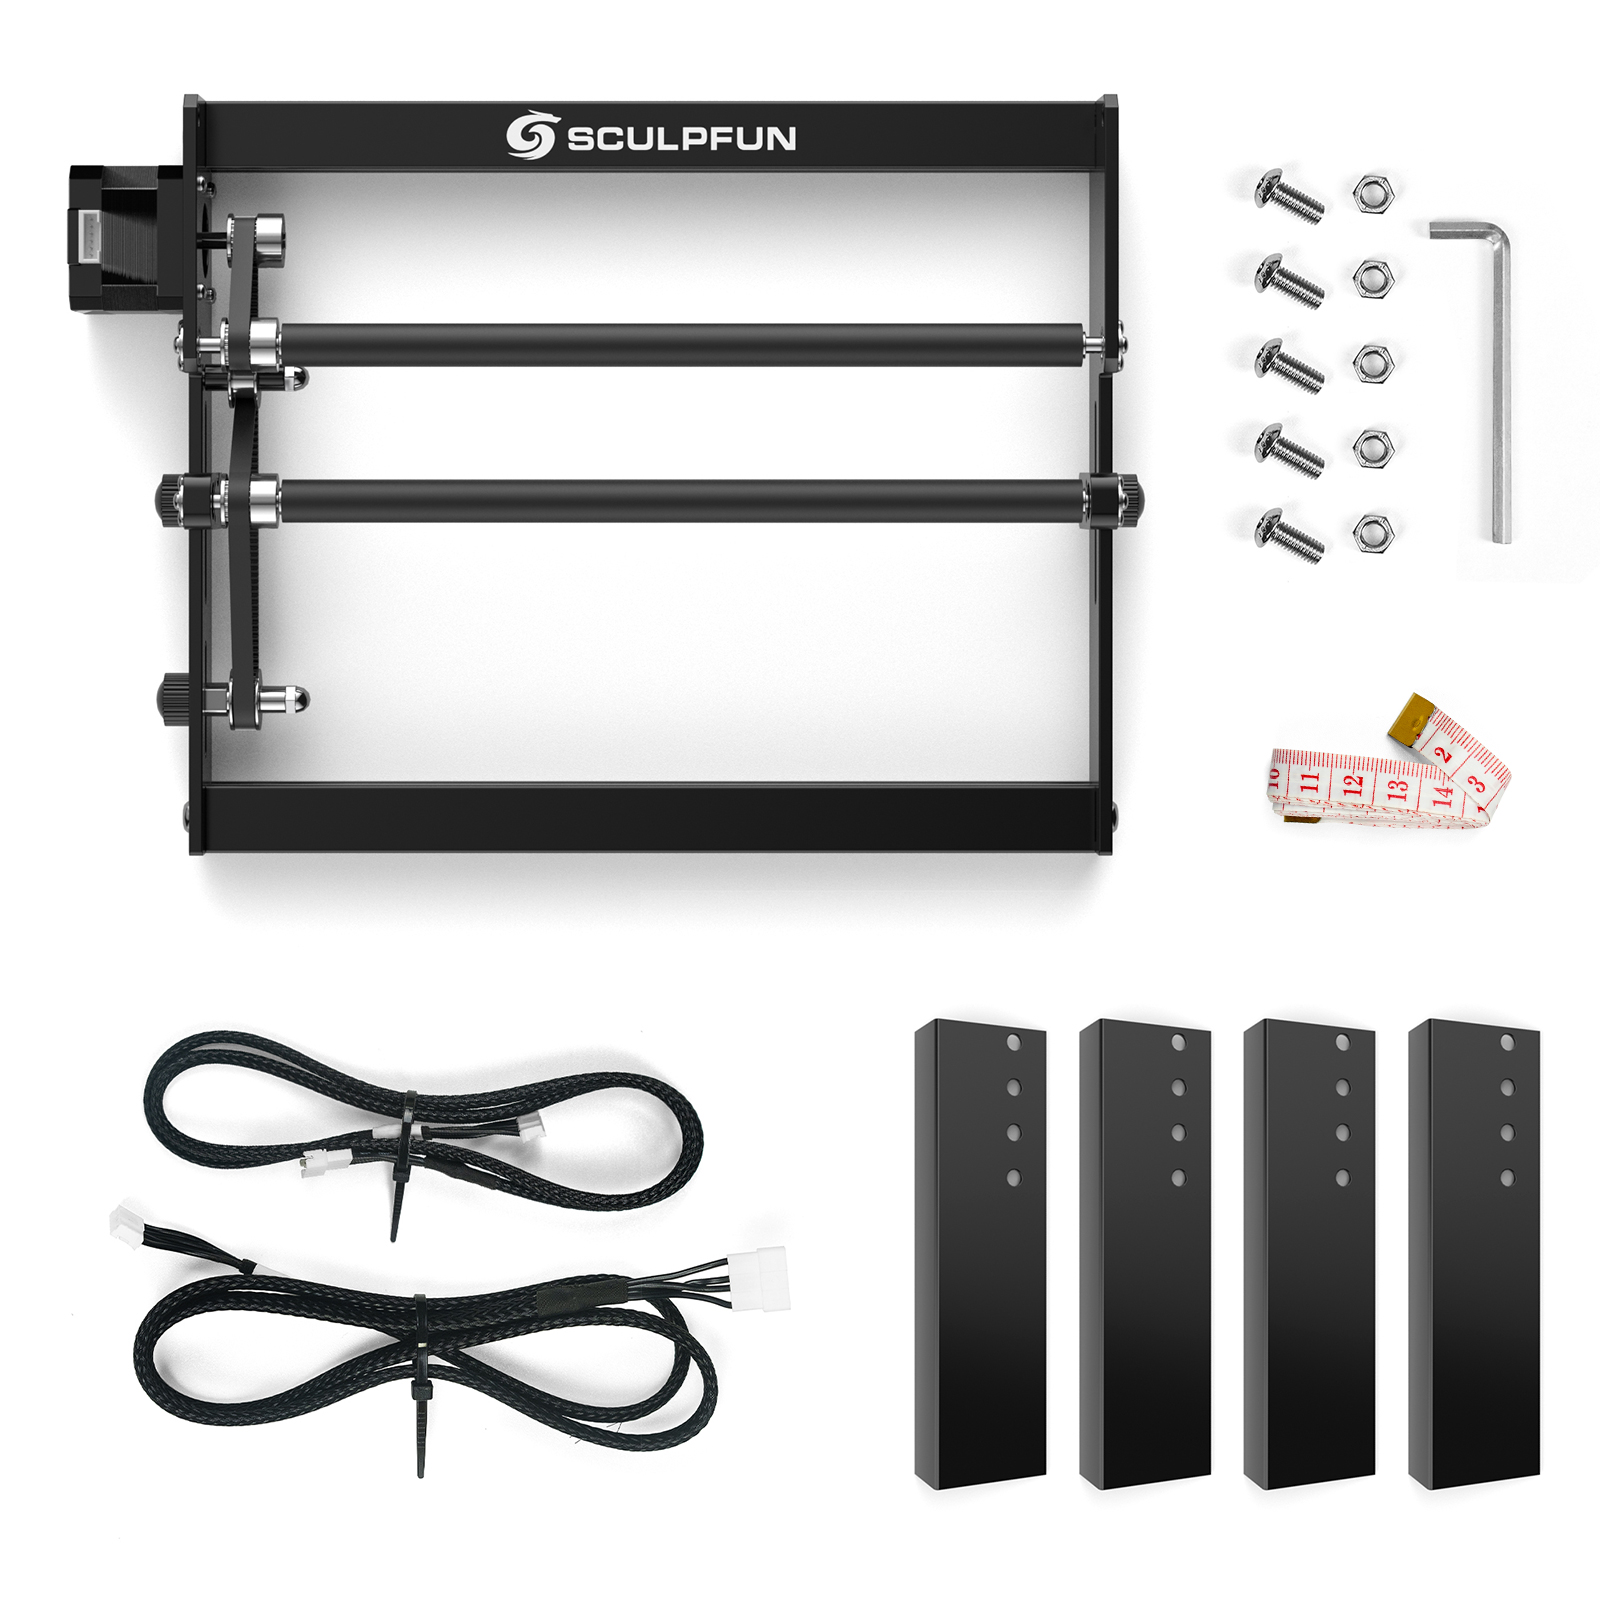 Find SCULPFUN Laser Rotary Roller for S9 Laser Engraver Y axis Roller 360 degree Rotating for 6 150mm Engraving Diameter 4 raise feet for Cylindrical Objects fit S6 S6 PRO for Sale on Gipsybee.com with cryptocurrencies